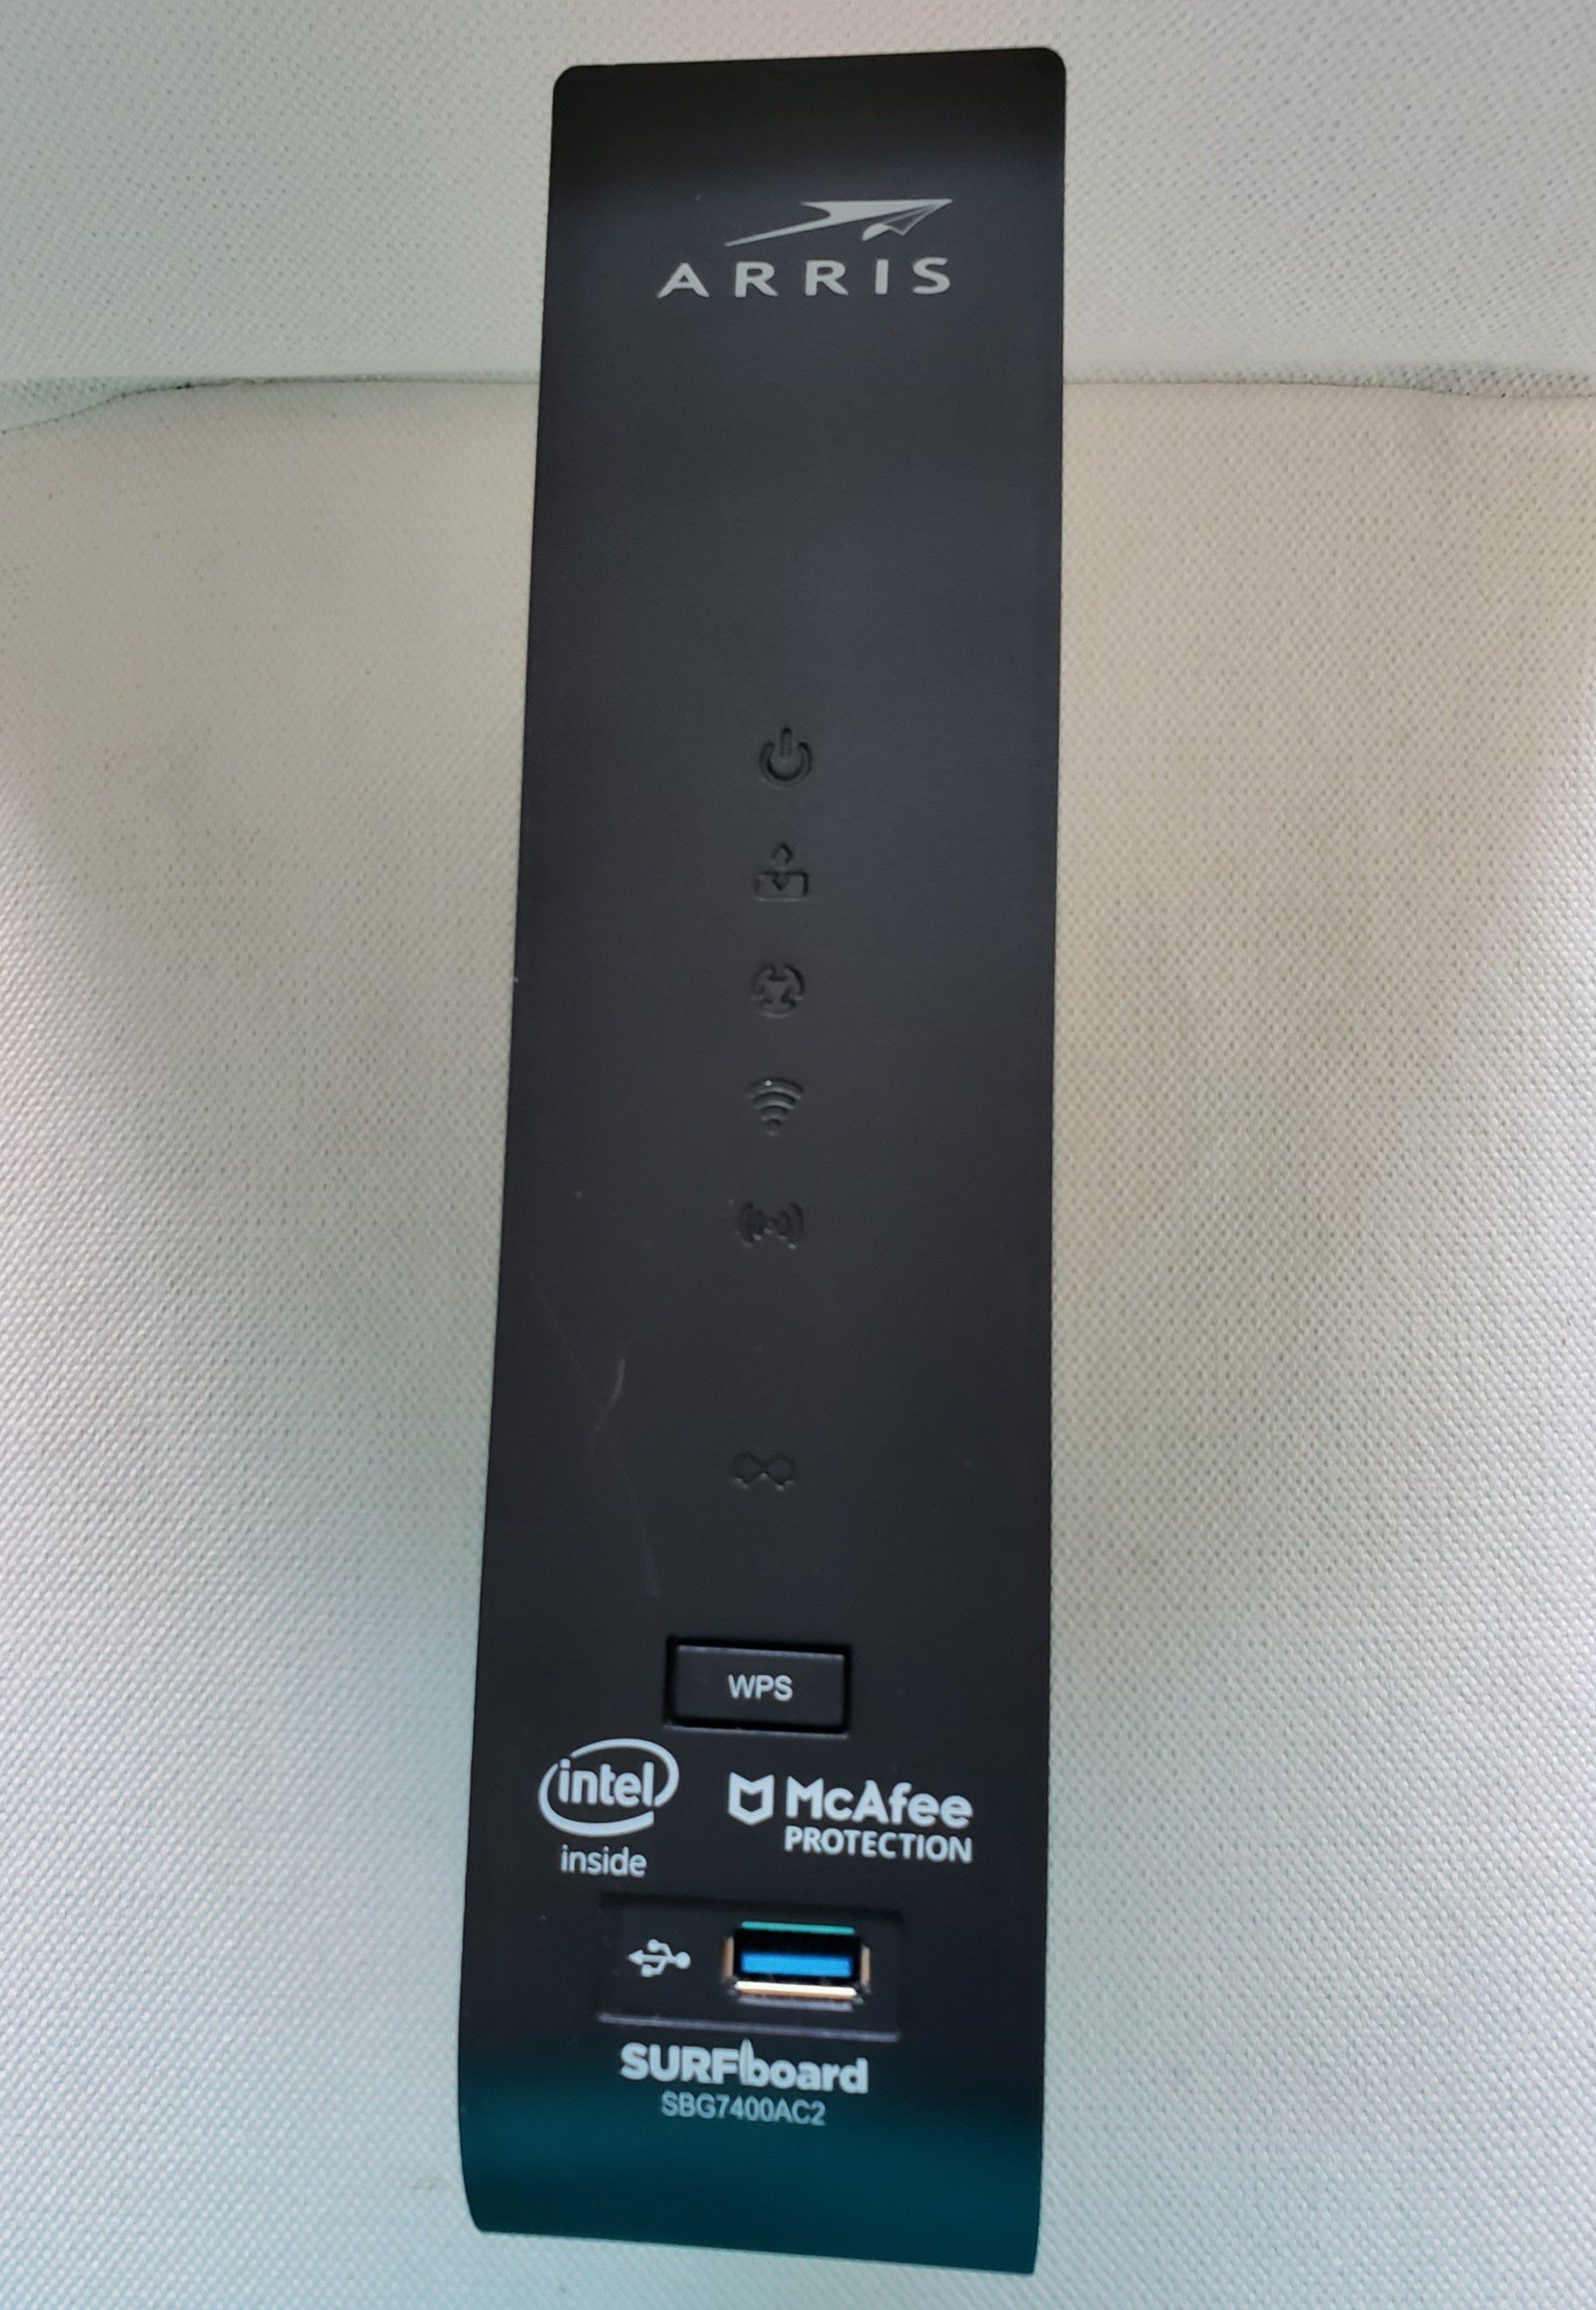 ARRIS SURFboard SBG7400AC2 DOCSIS 3.0 Cable Modem and Router